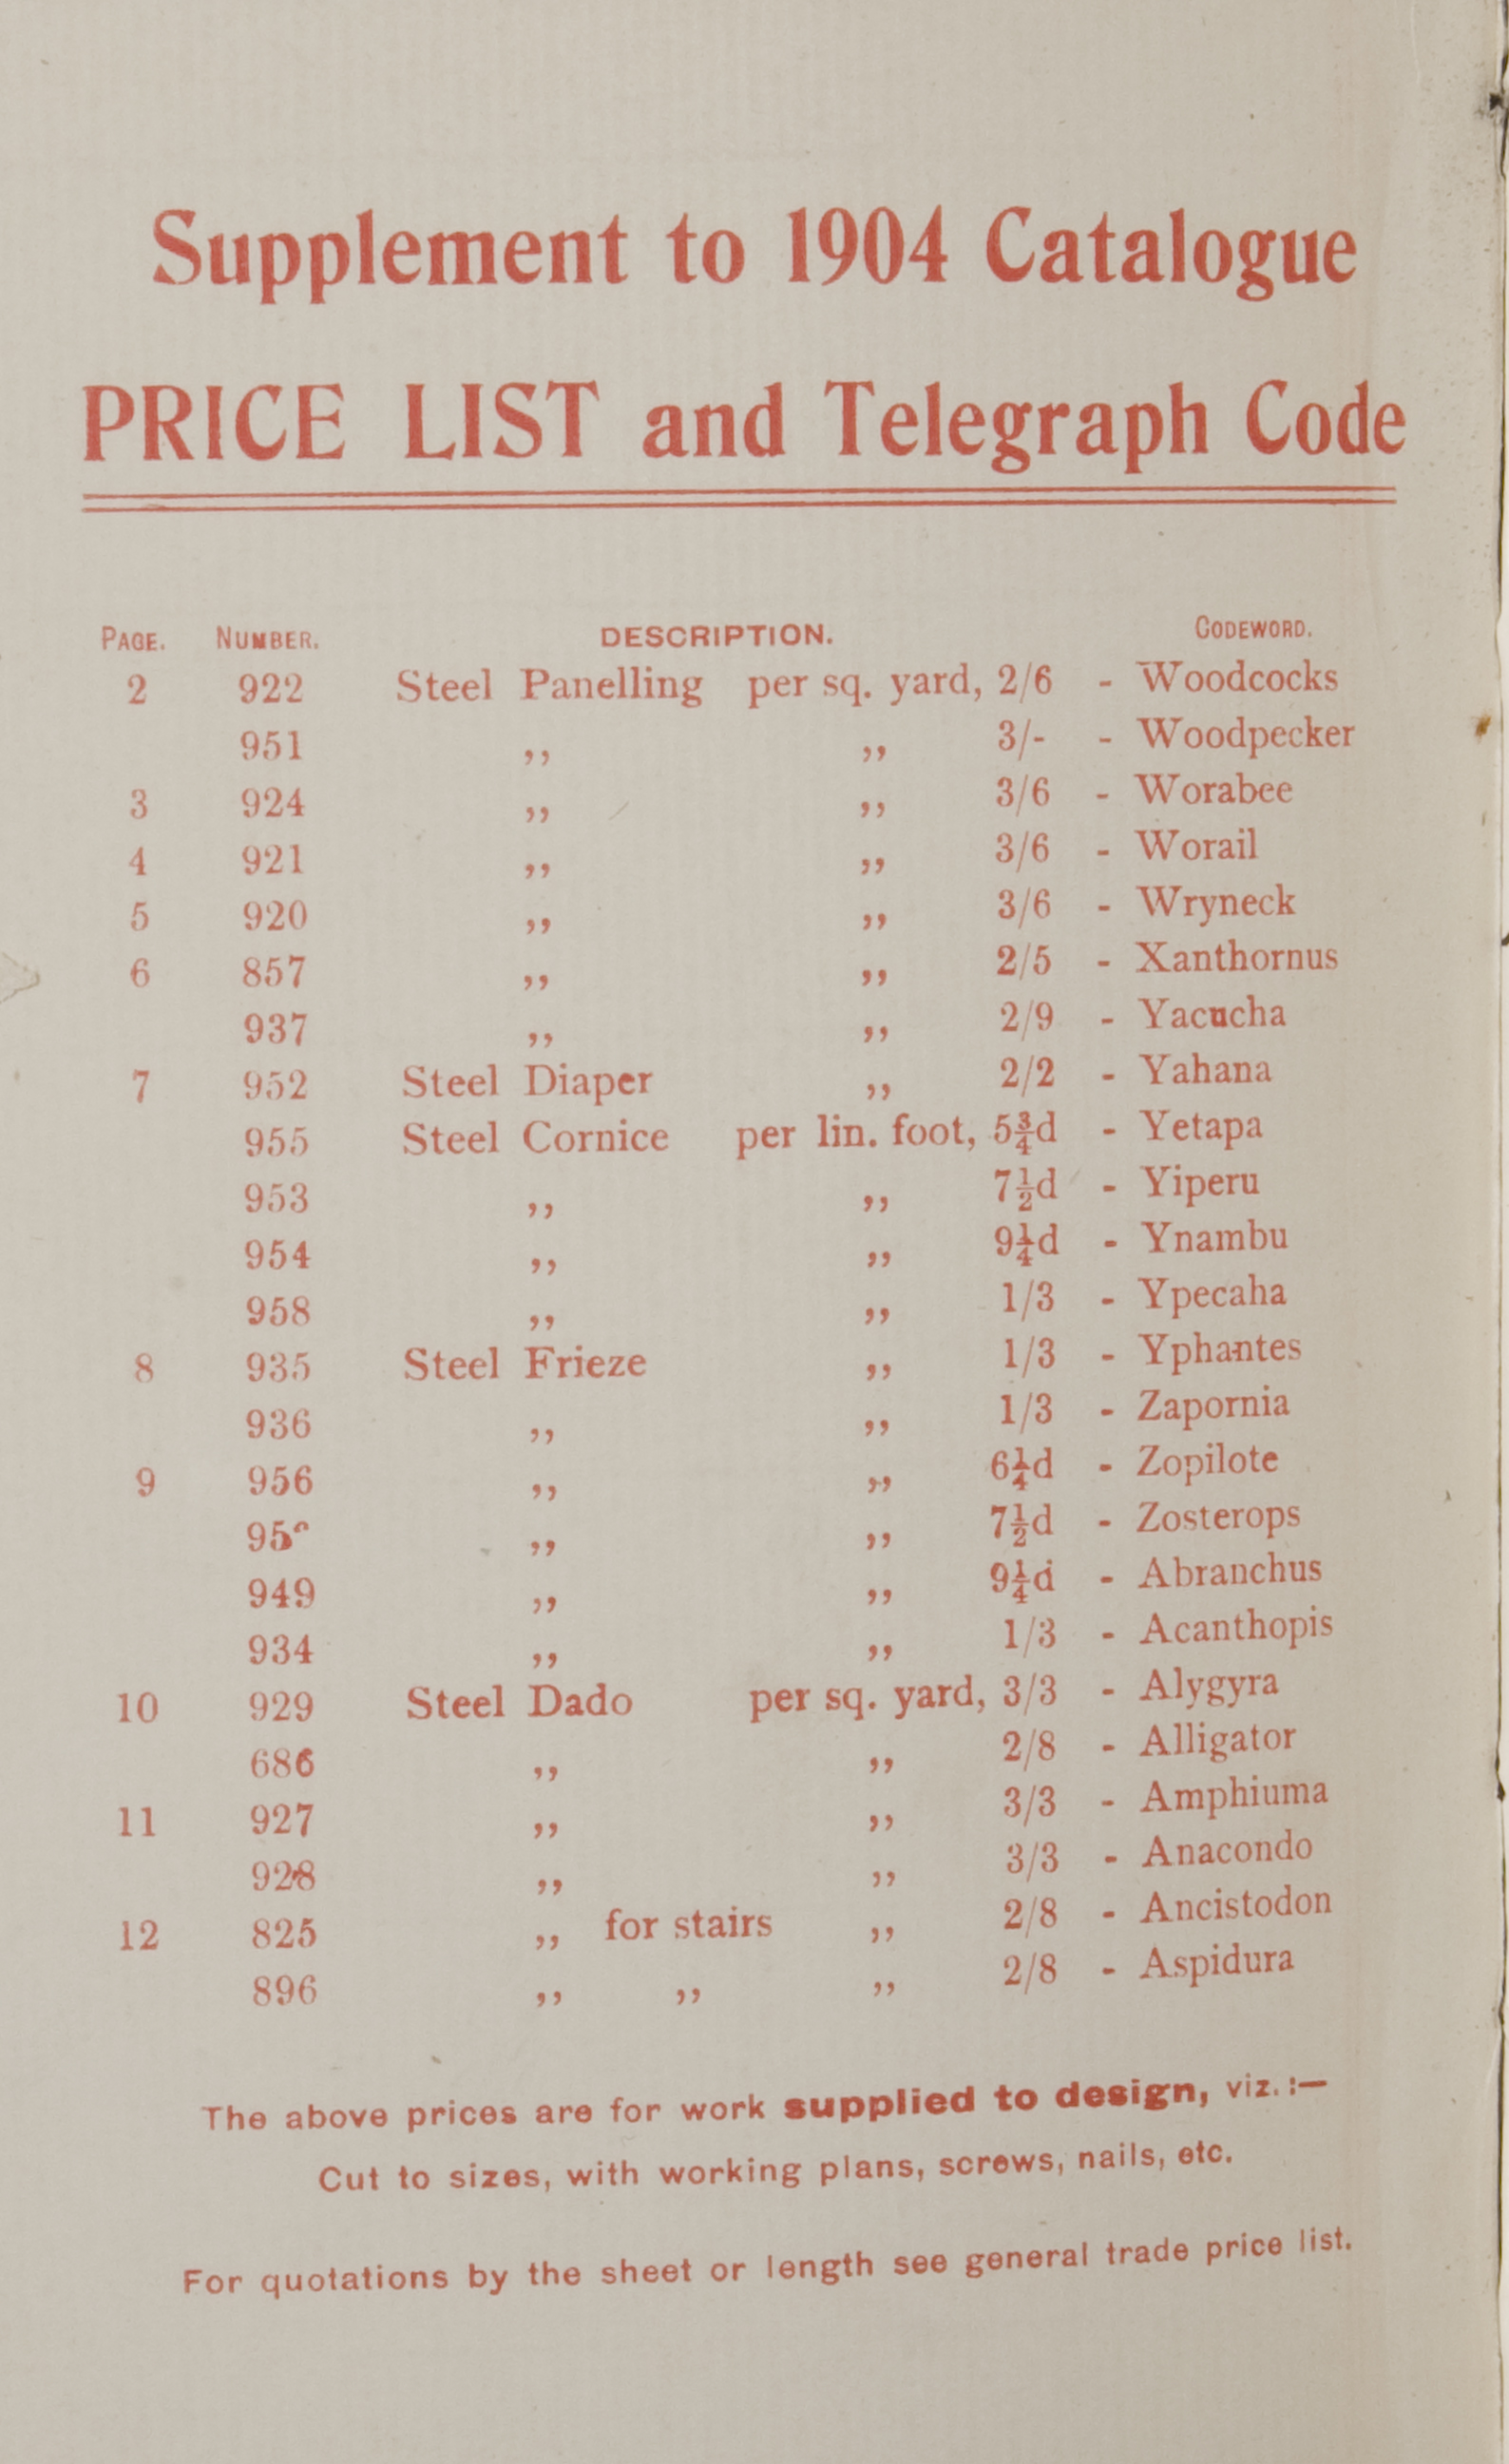 Page from Wunderlich supplement catalogue